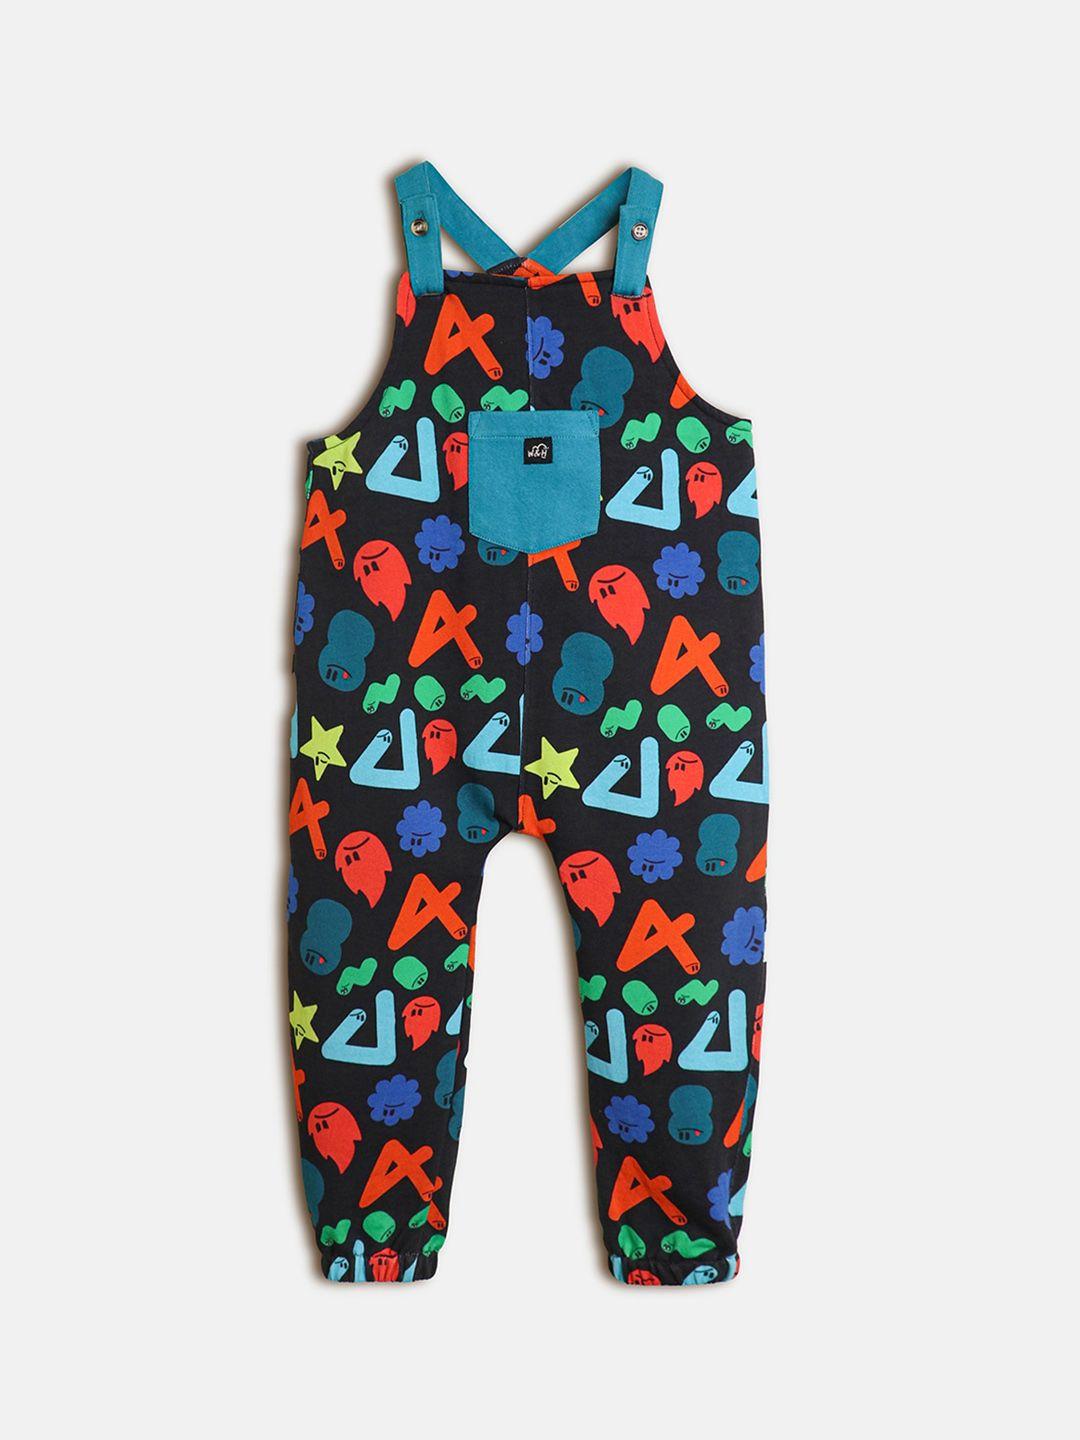 whistle-&-hops-kids-geometric-printed-pure-cotton-dungaree